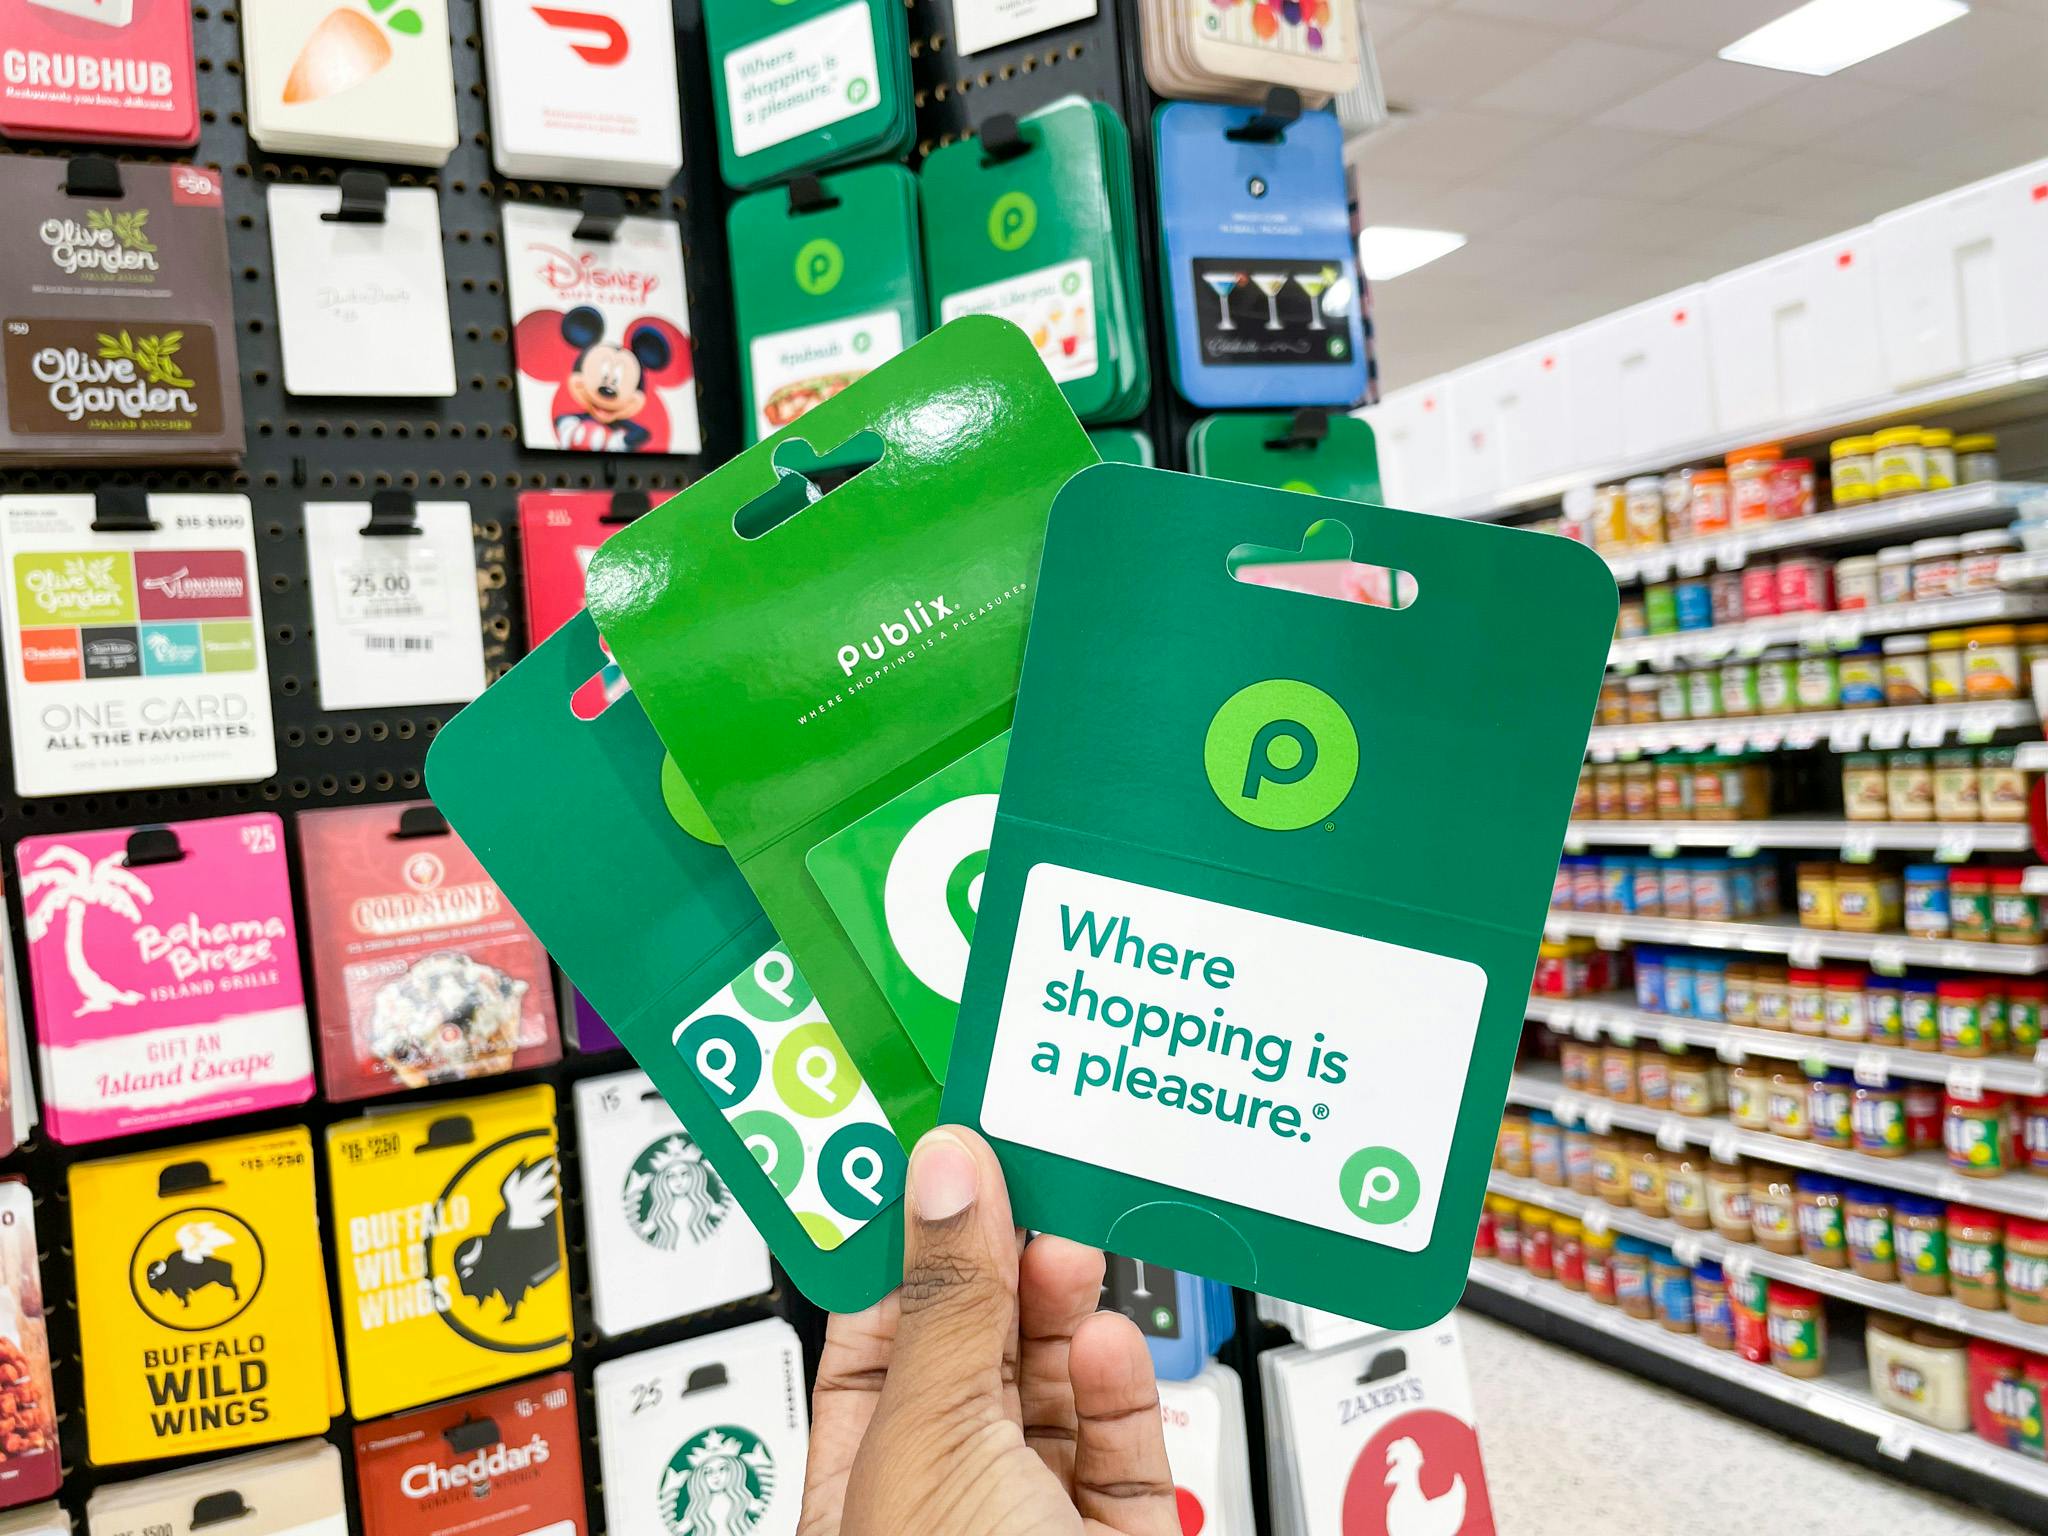 earn-publix-gift-cards-with-stocking-spree-365-loyalty-program-the